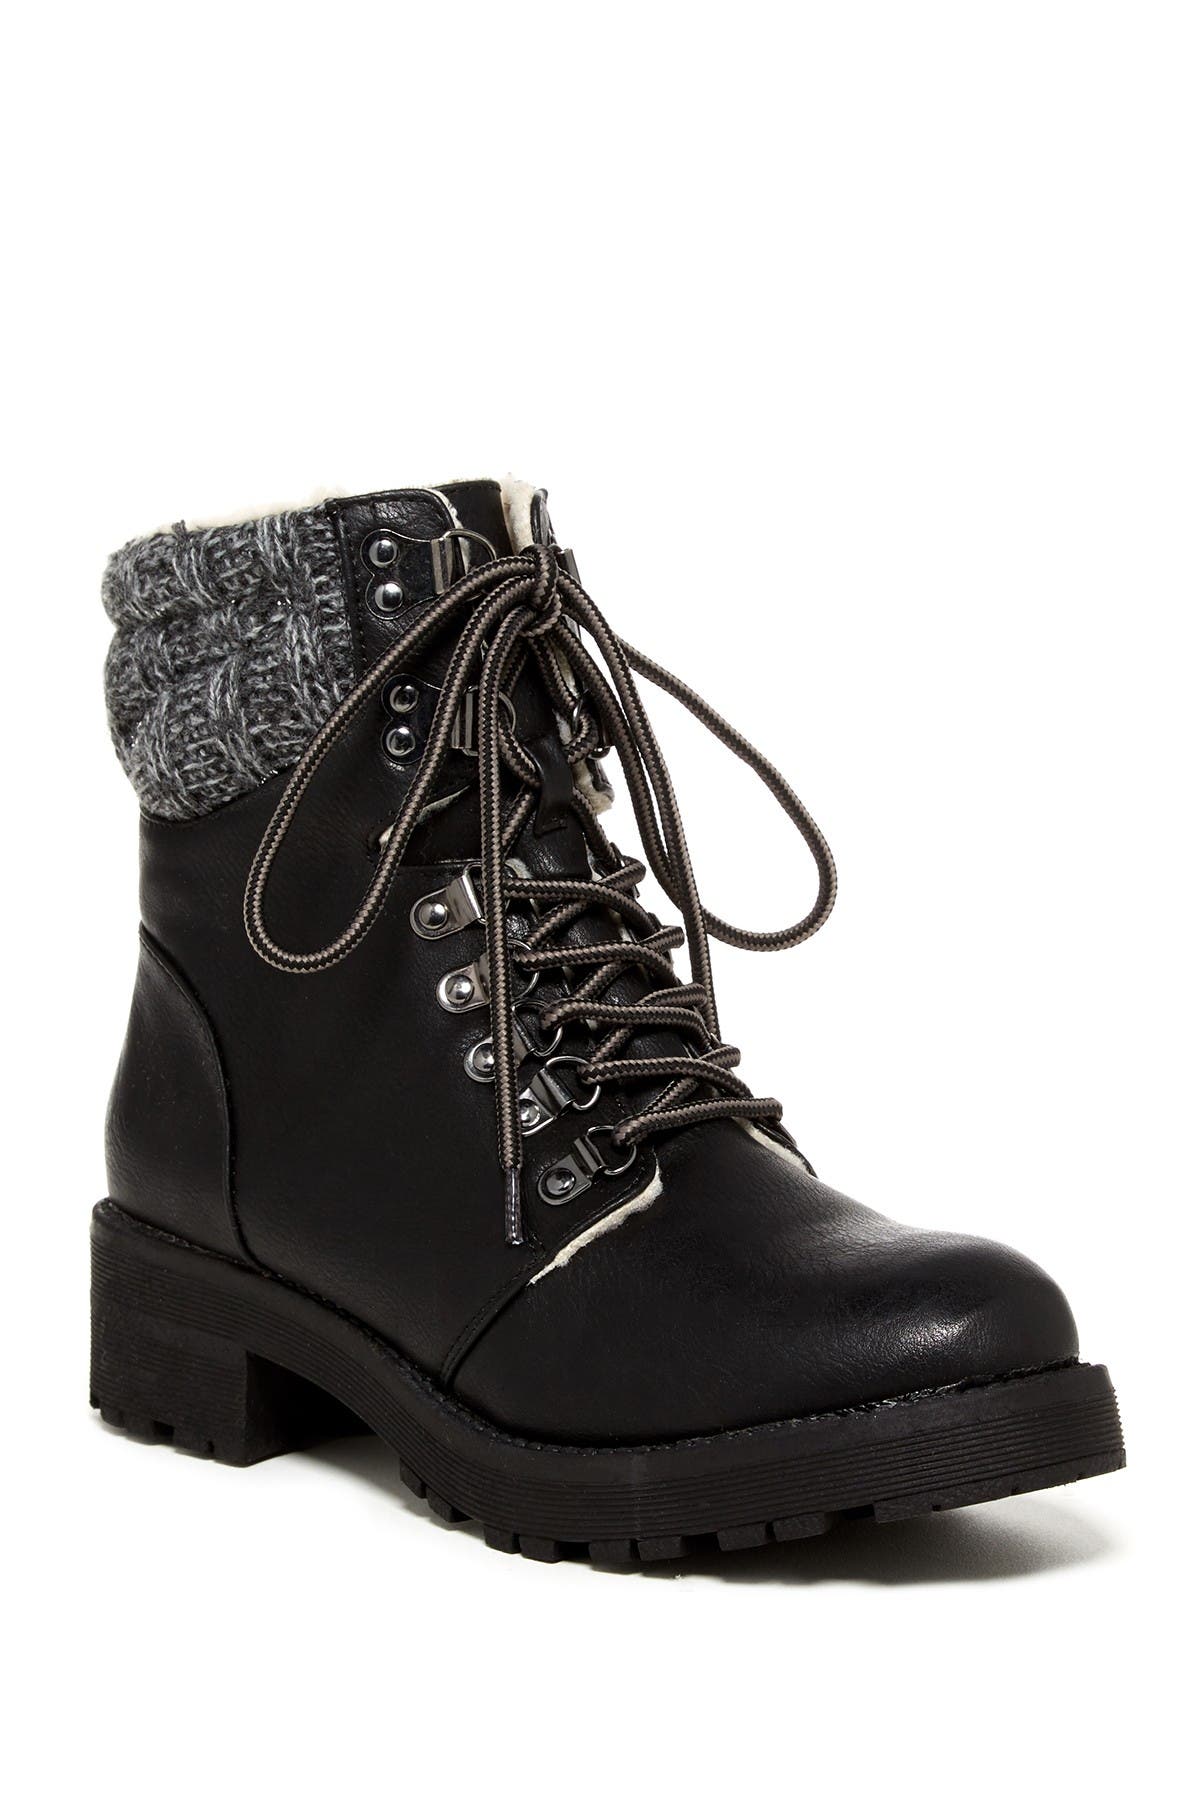 black shearling lined boots